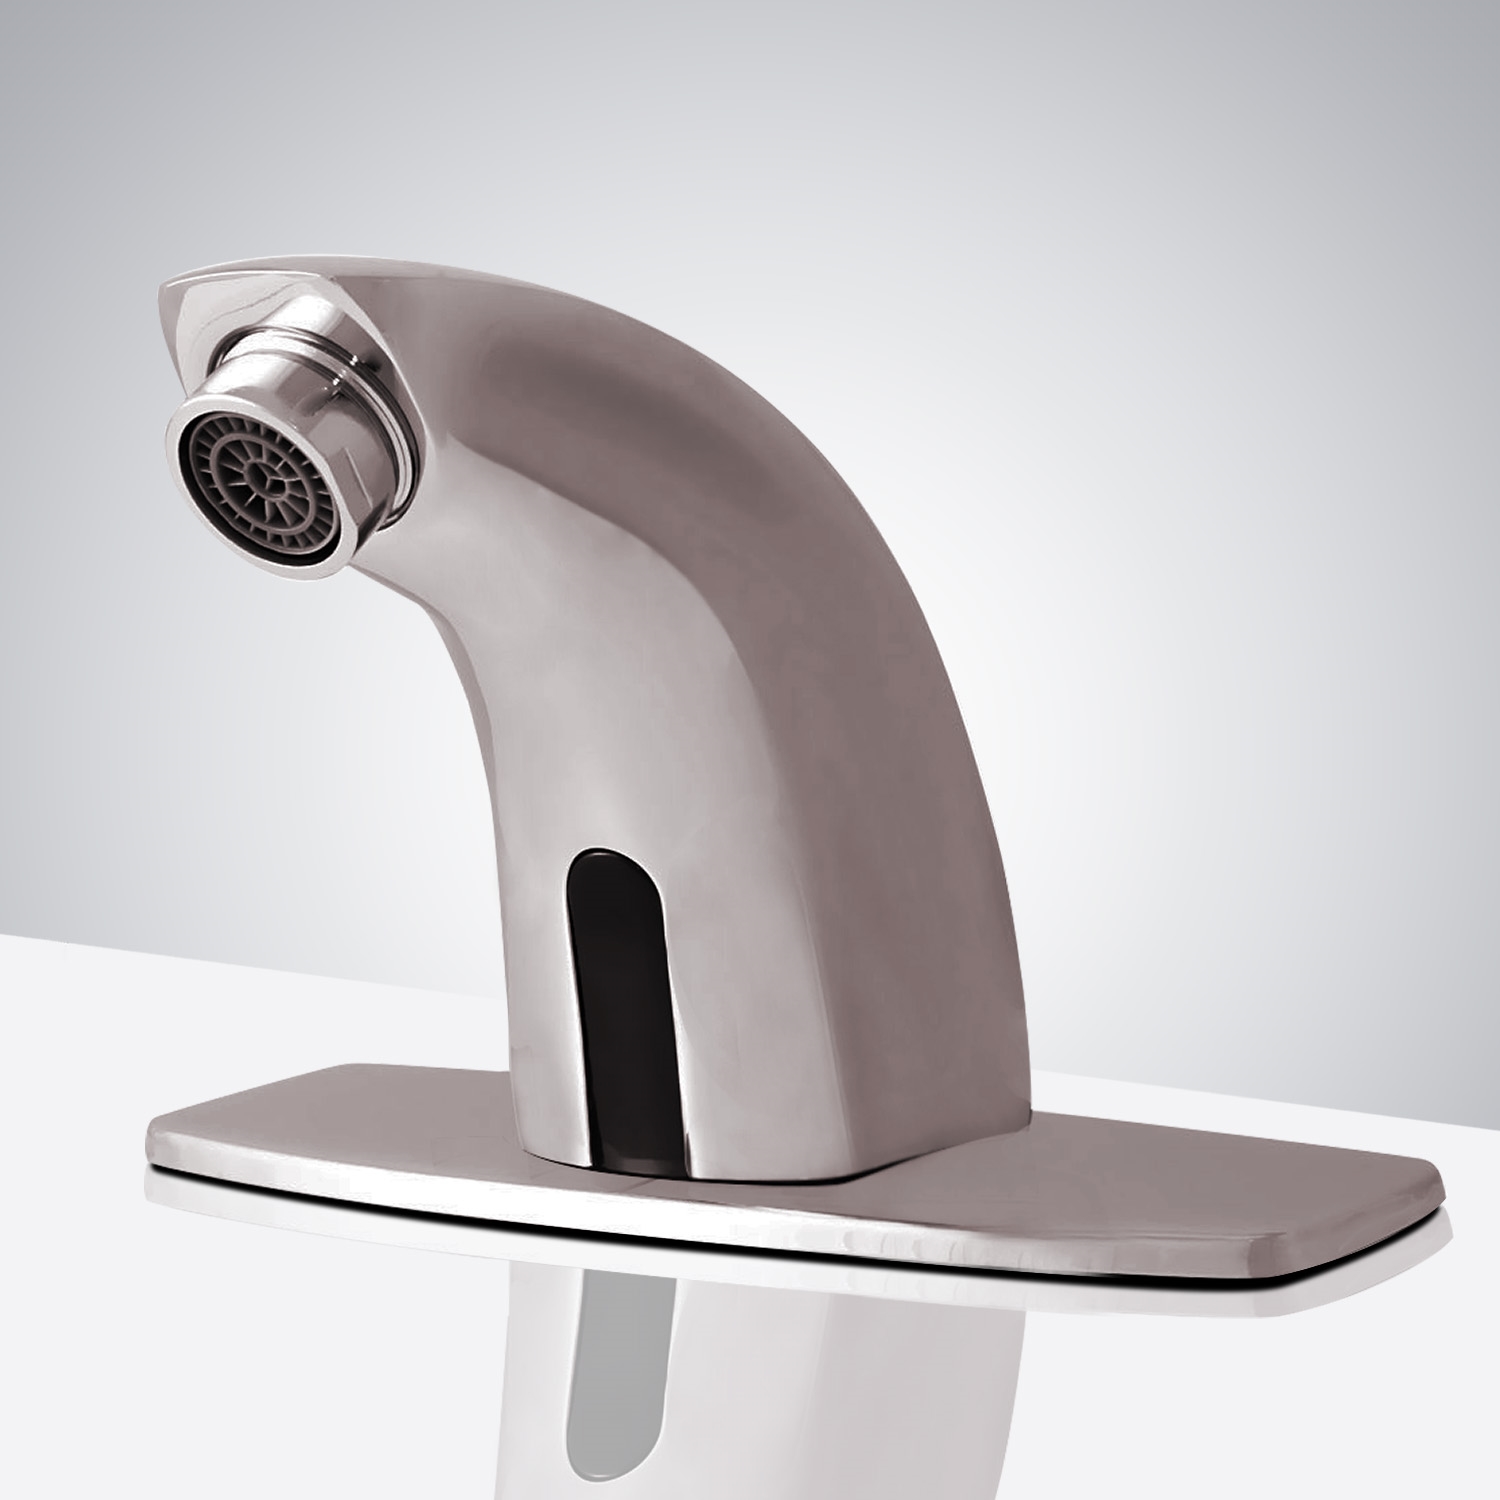 Fontana Commercial High Quality Brushed Nickel Touchless Automatic Sensor Sink Faucet